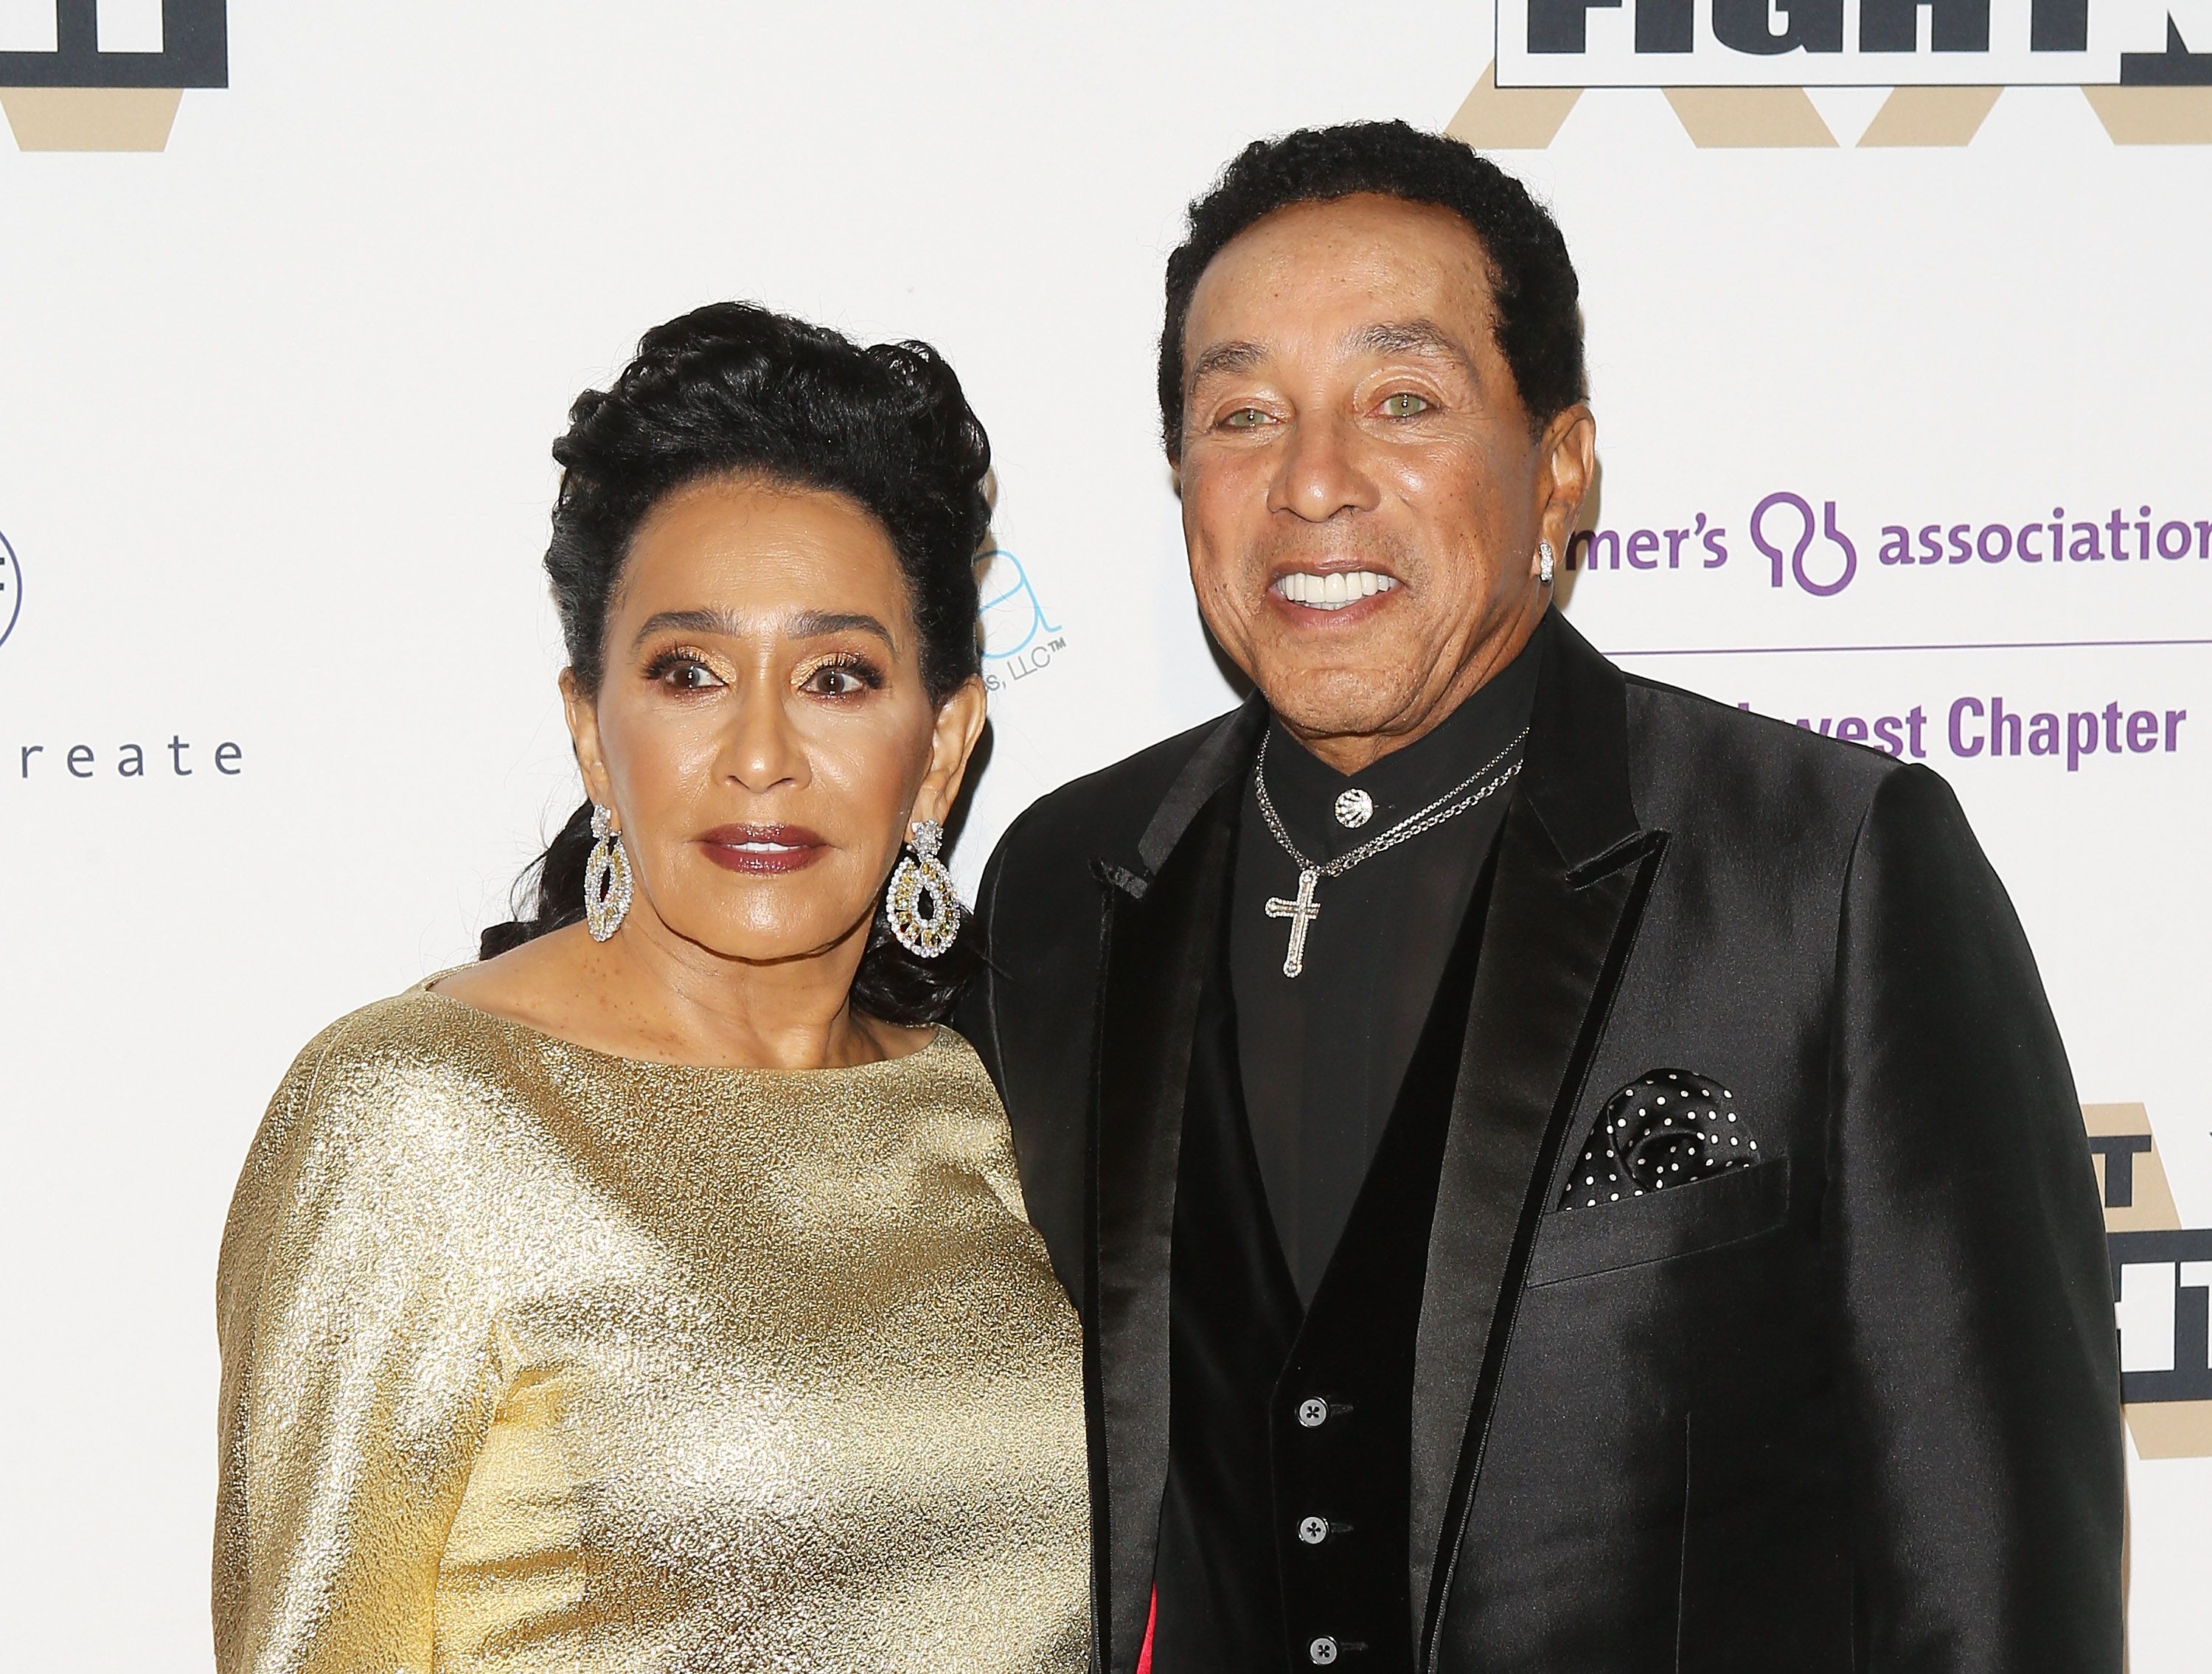 Smokey Robinson and Claudette Robinson during the Celebrity Fight Night XXIV held at JW Marriot Desert Ridge Resort & Spa on March 10, 2018 in Phoenix, Arizona. | Source: Getty Images